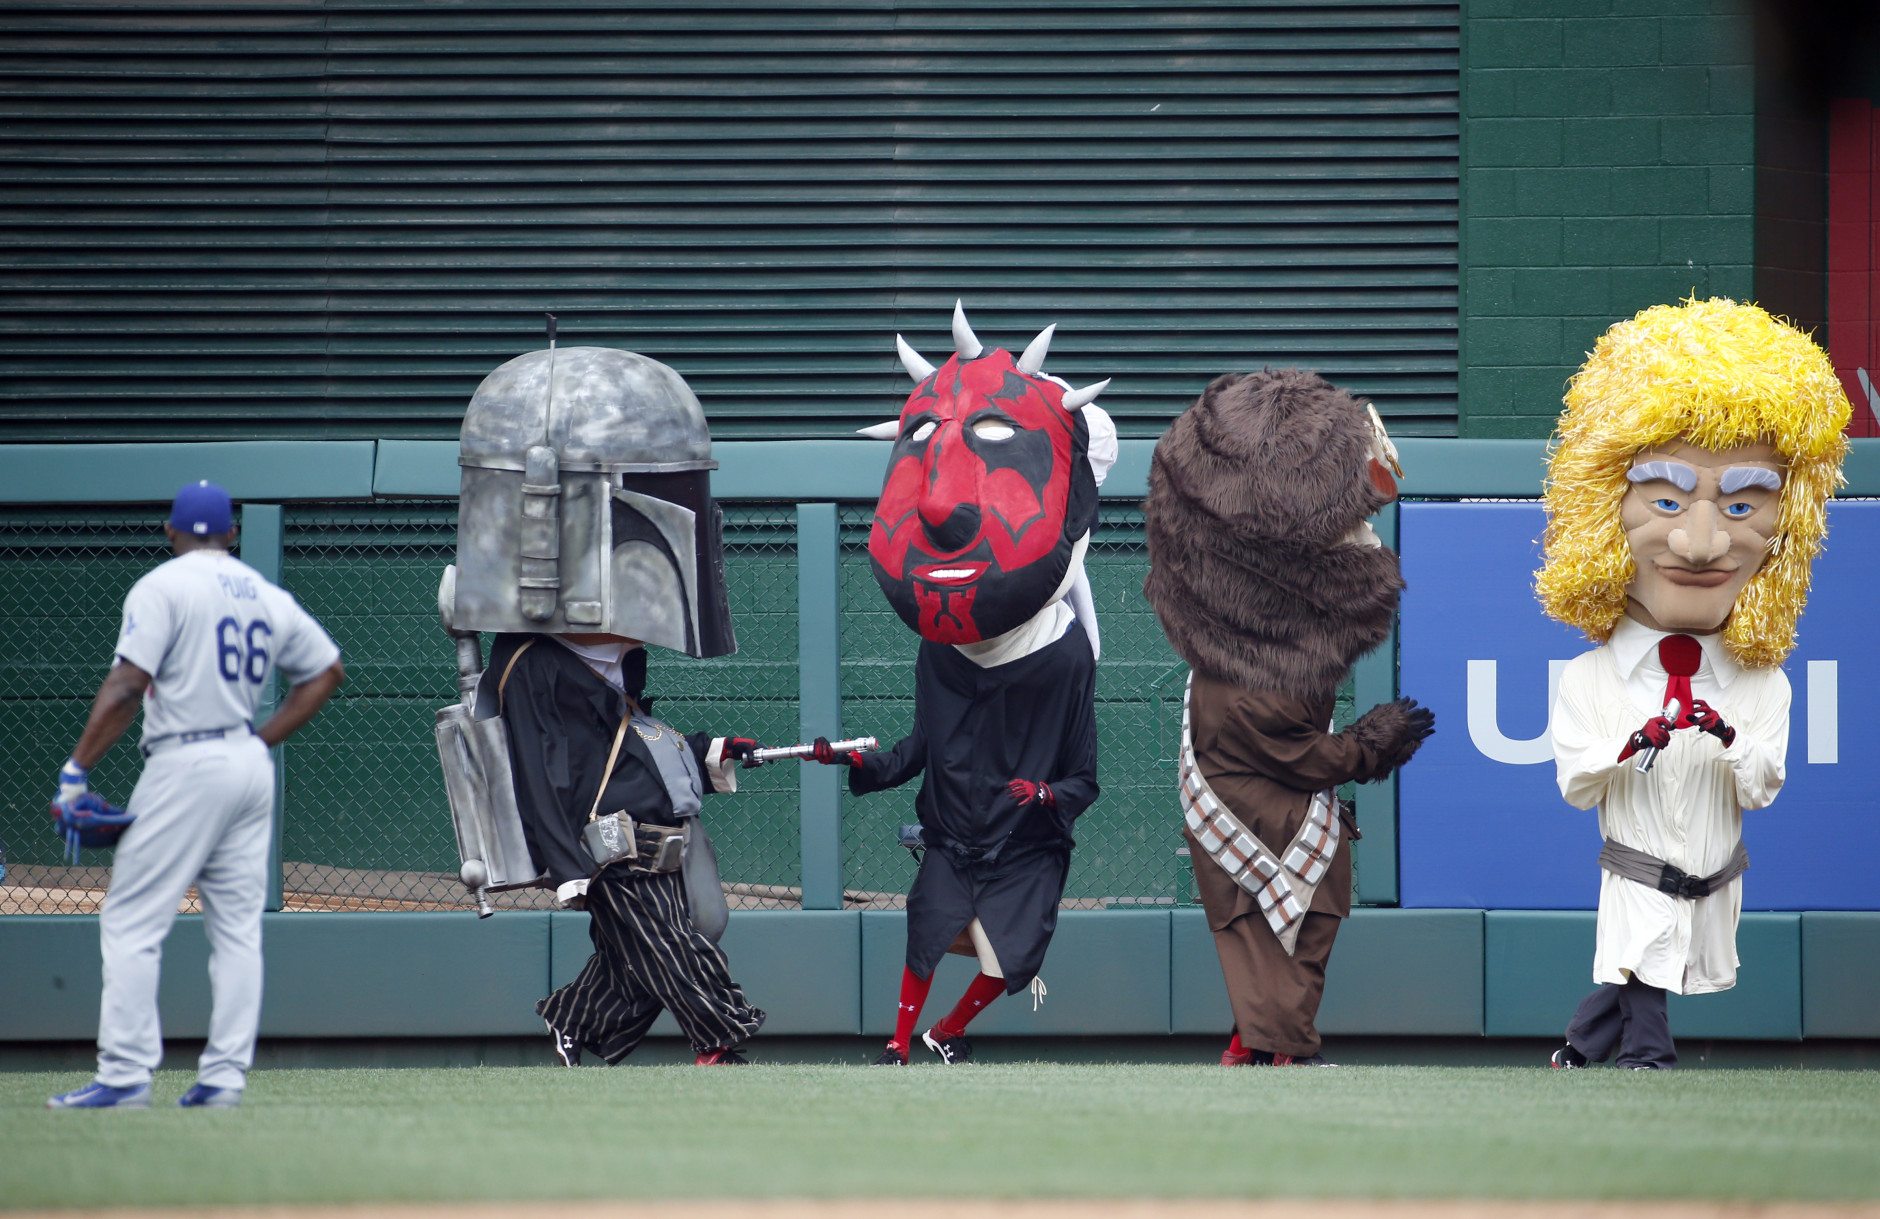 Los Angeles Dodgers right fielder Yasiel Puig (66) watches the Washington Nationals mascots the "Racing President," race as they are dressed up as Star Wars characters on Star Wars day during a baseball game at Nationals Park, Sunday, July 19, 2015, in Washington. (AP Photo/Alex Brandon)